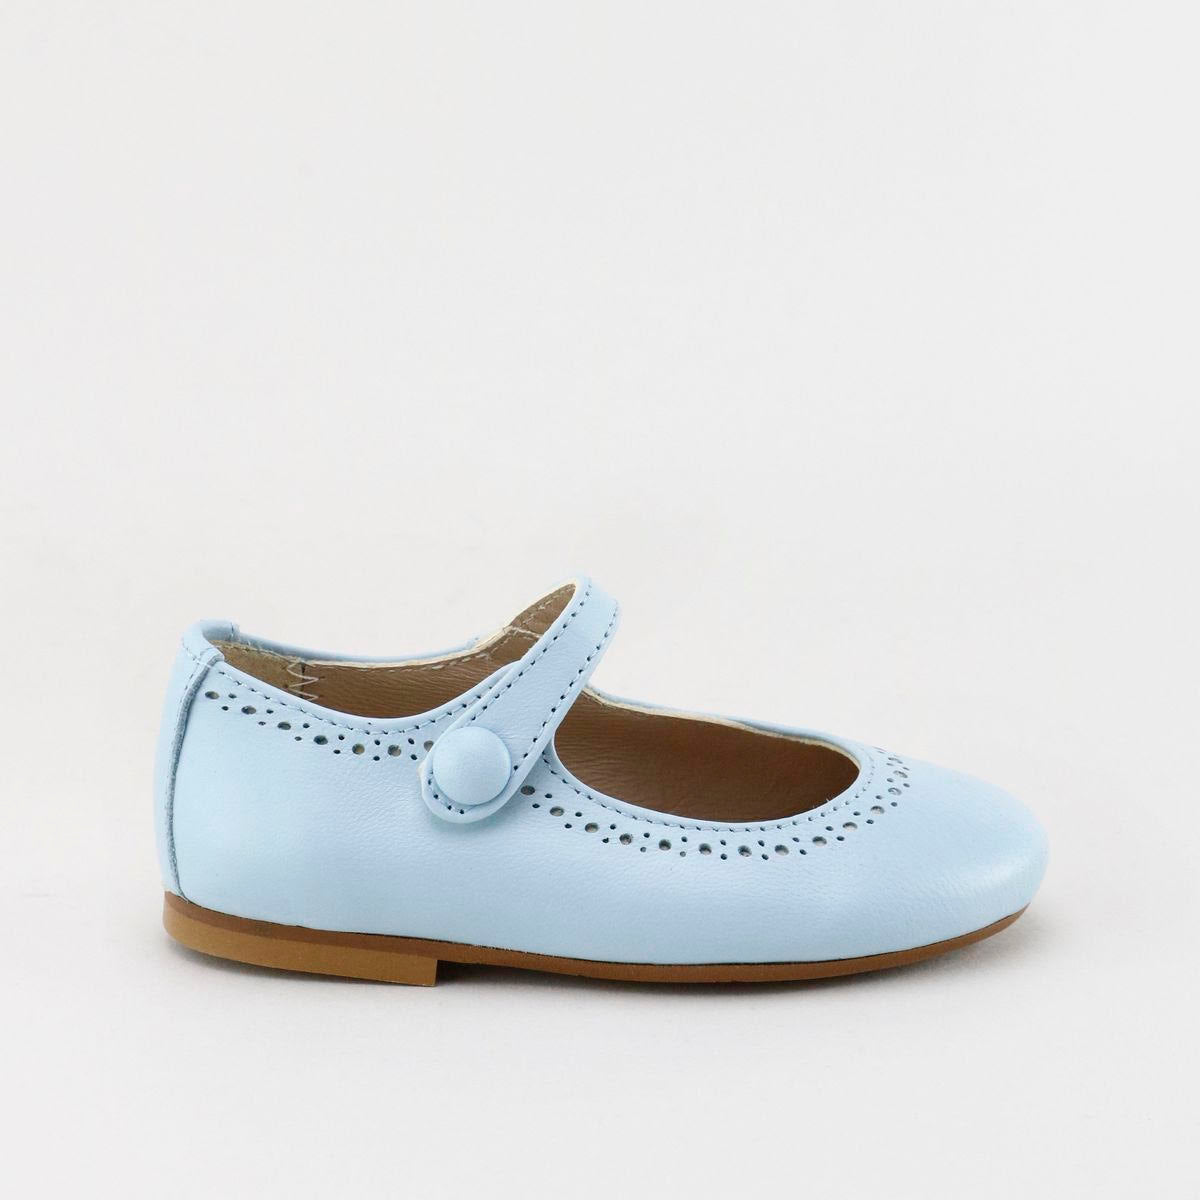 PAPANATAS LIGHT BLUE LEATHER DOTTED DESIGN ROUNDED MARY JANE